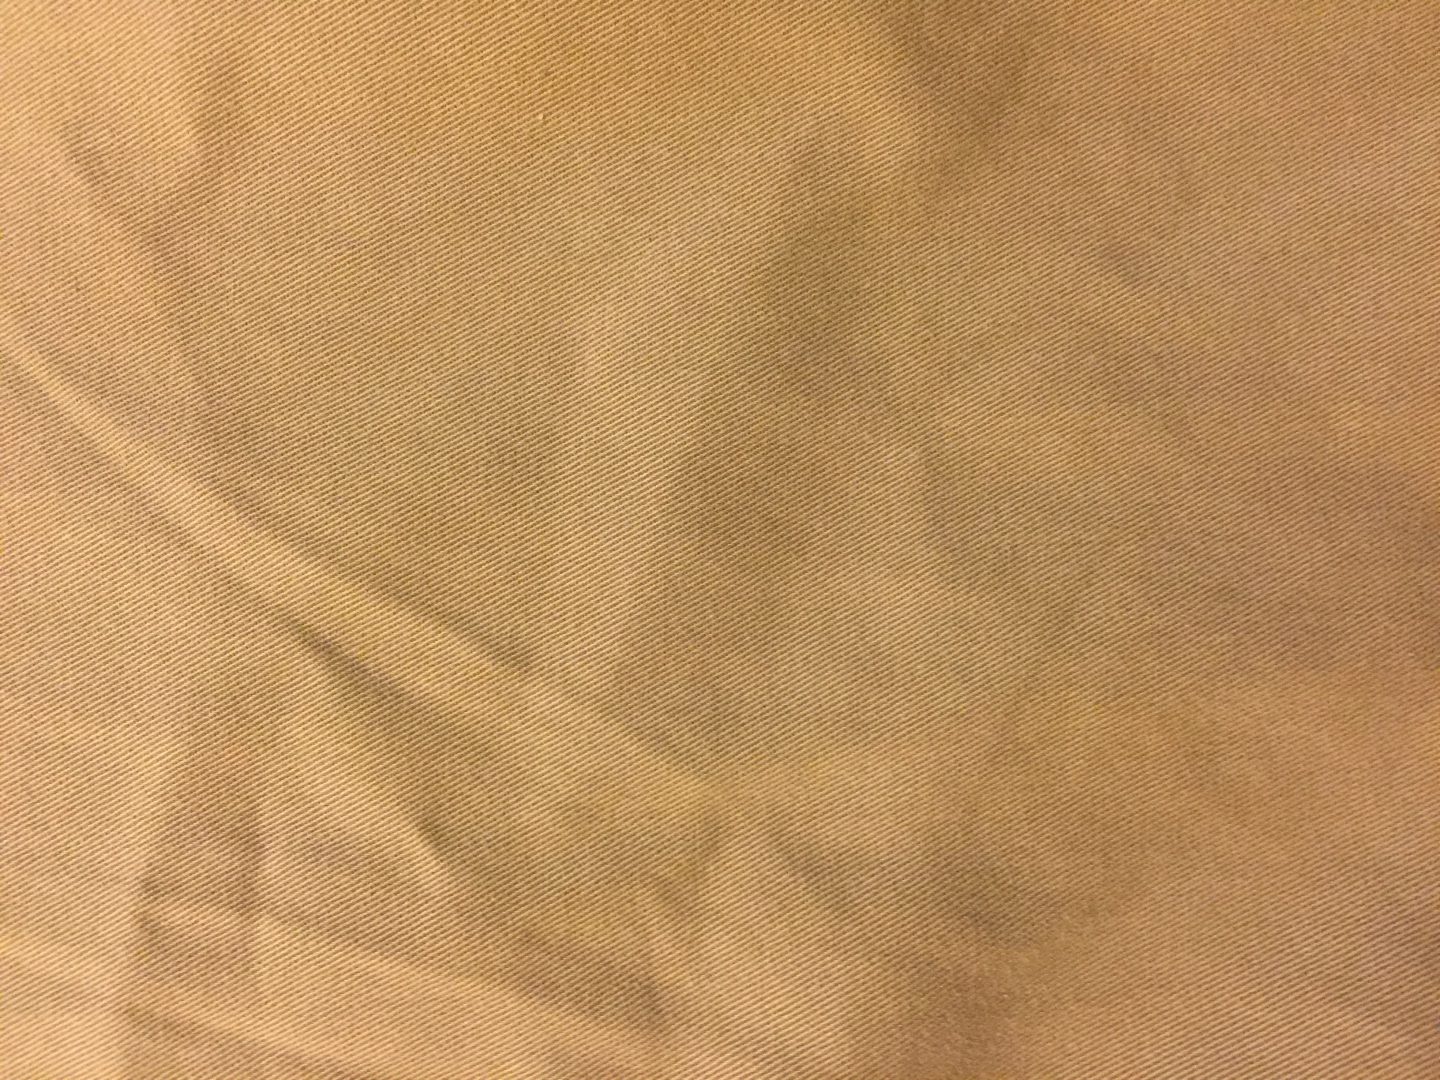 Wide shot of wrinkled khaki fabric | Free Textures